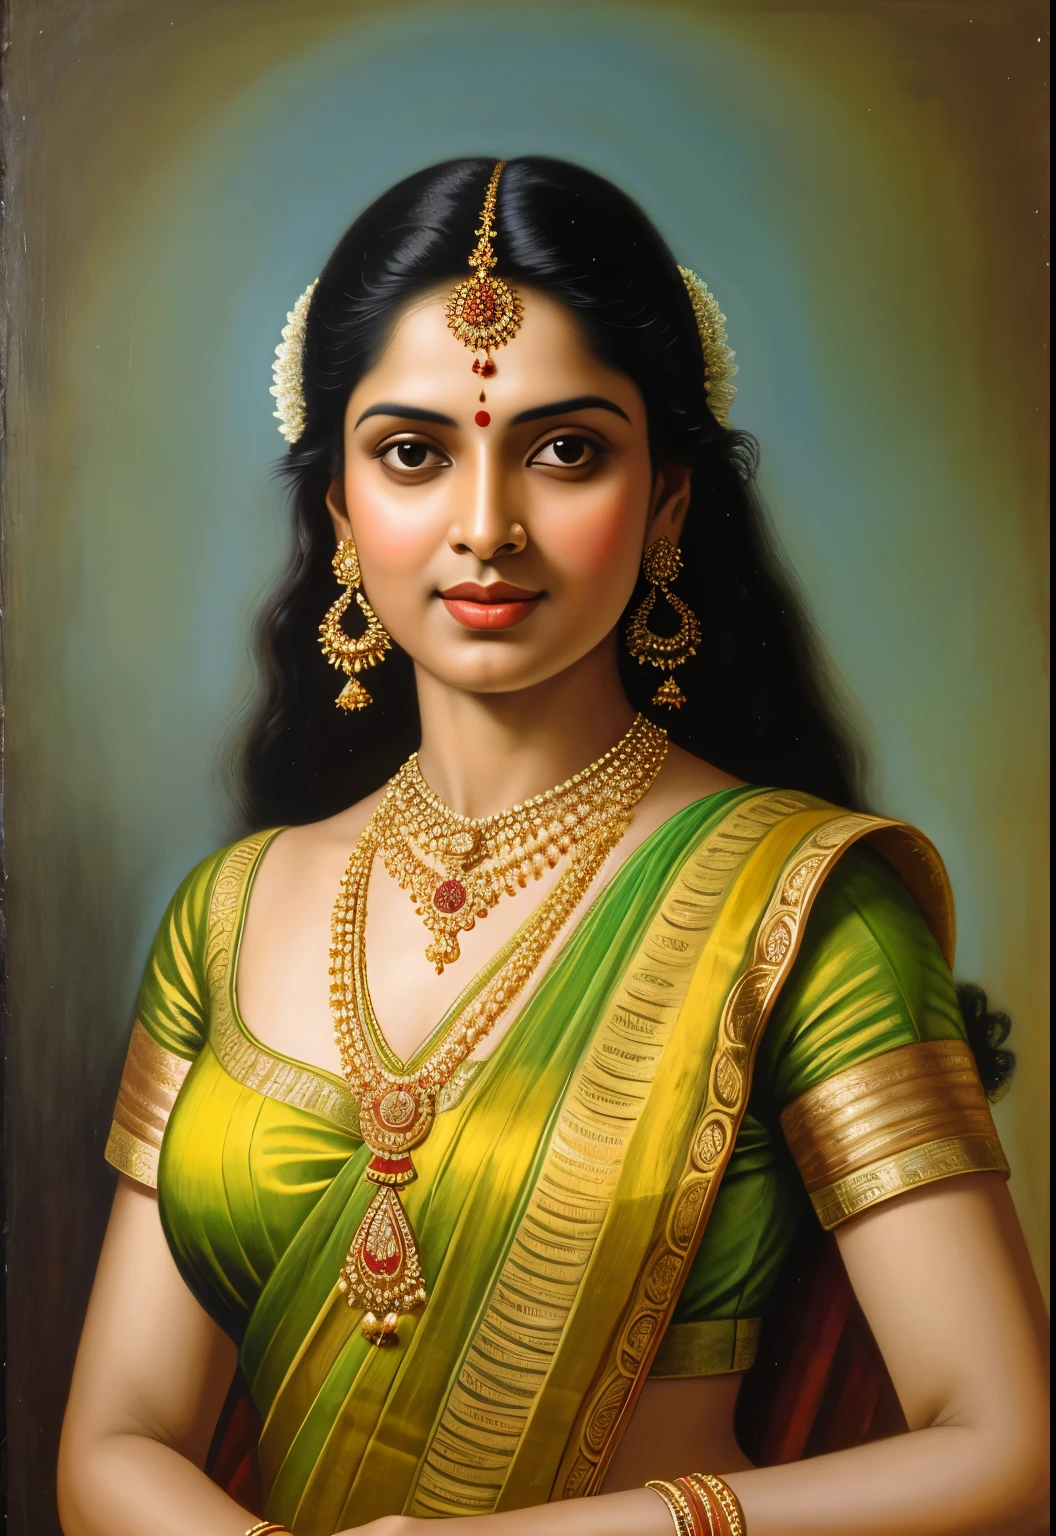 painting of a woman in a sari with a necklace and earrings, inspired by Raja Ravi Varma, szukalski ravi varma, portrait of a beautiful goddess, by Raja Ravi Varma, indian goddess, traditional beauty, a stunning portrait of a goddess, inspired by T. K. Padmini, indian art, indian goddess of wealth, portrait of a goddess